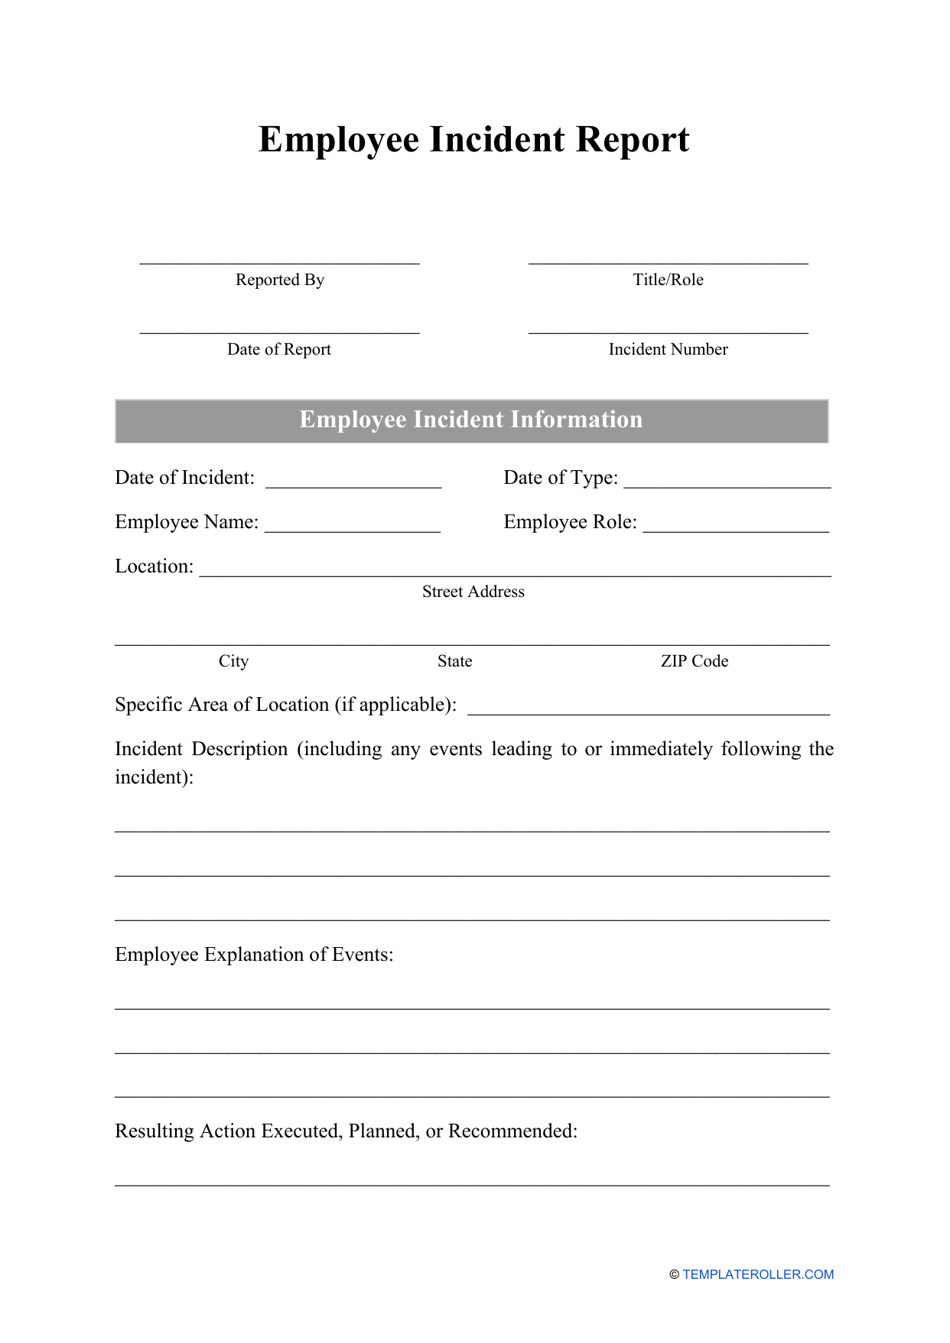 Employee Incident Report Form, Page 1